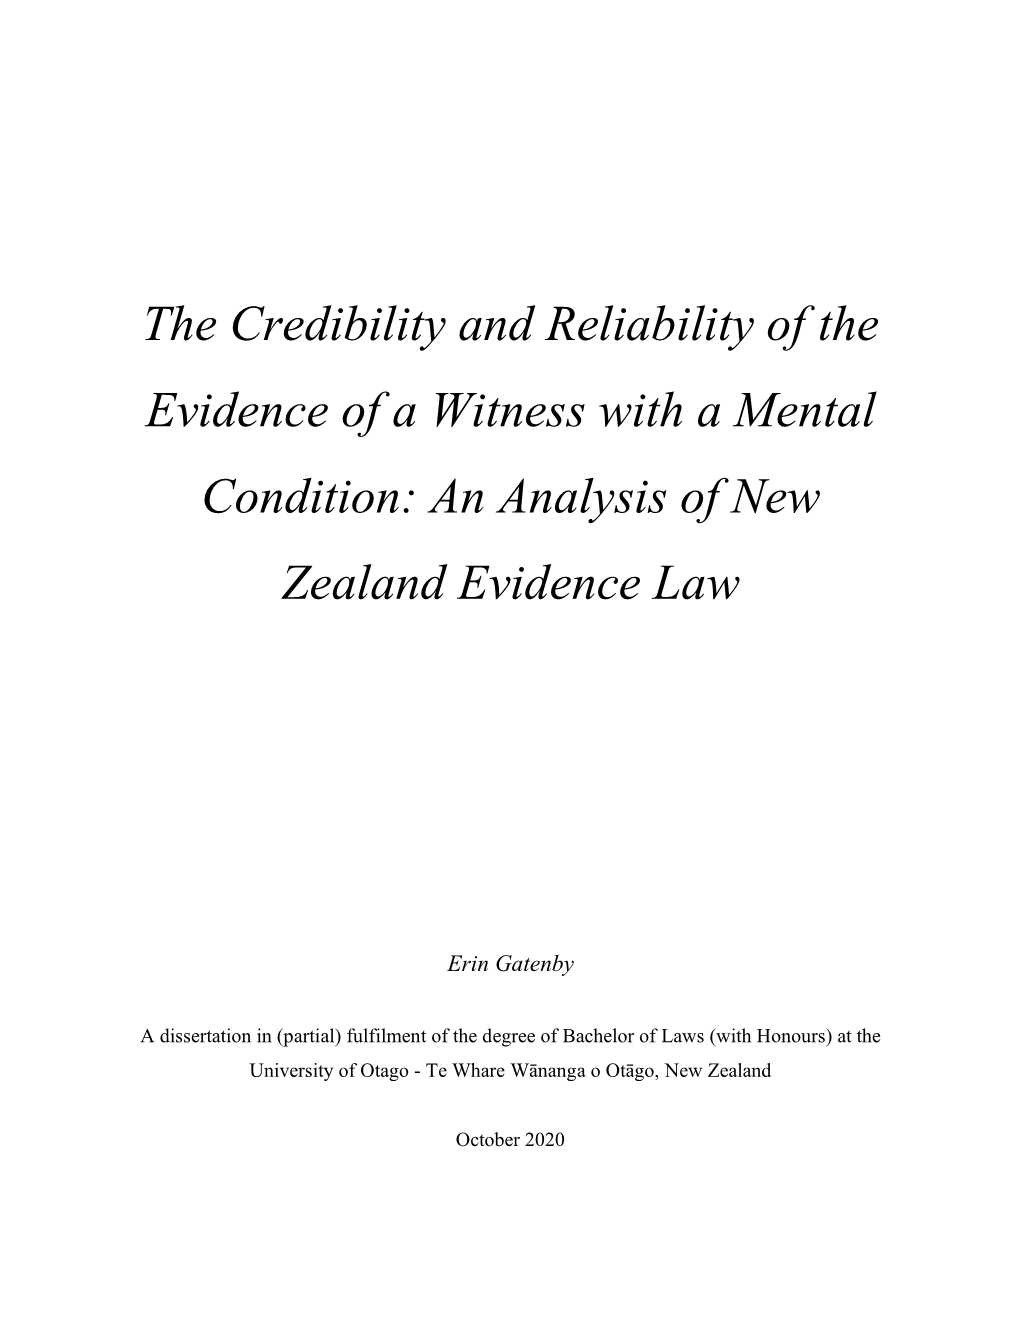 The Credibility and Reliability of the Evidence of a Witness with a Mental Condition: an Analysis of New